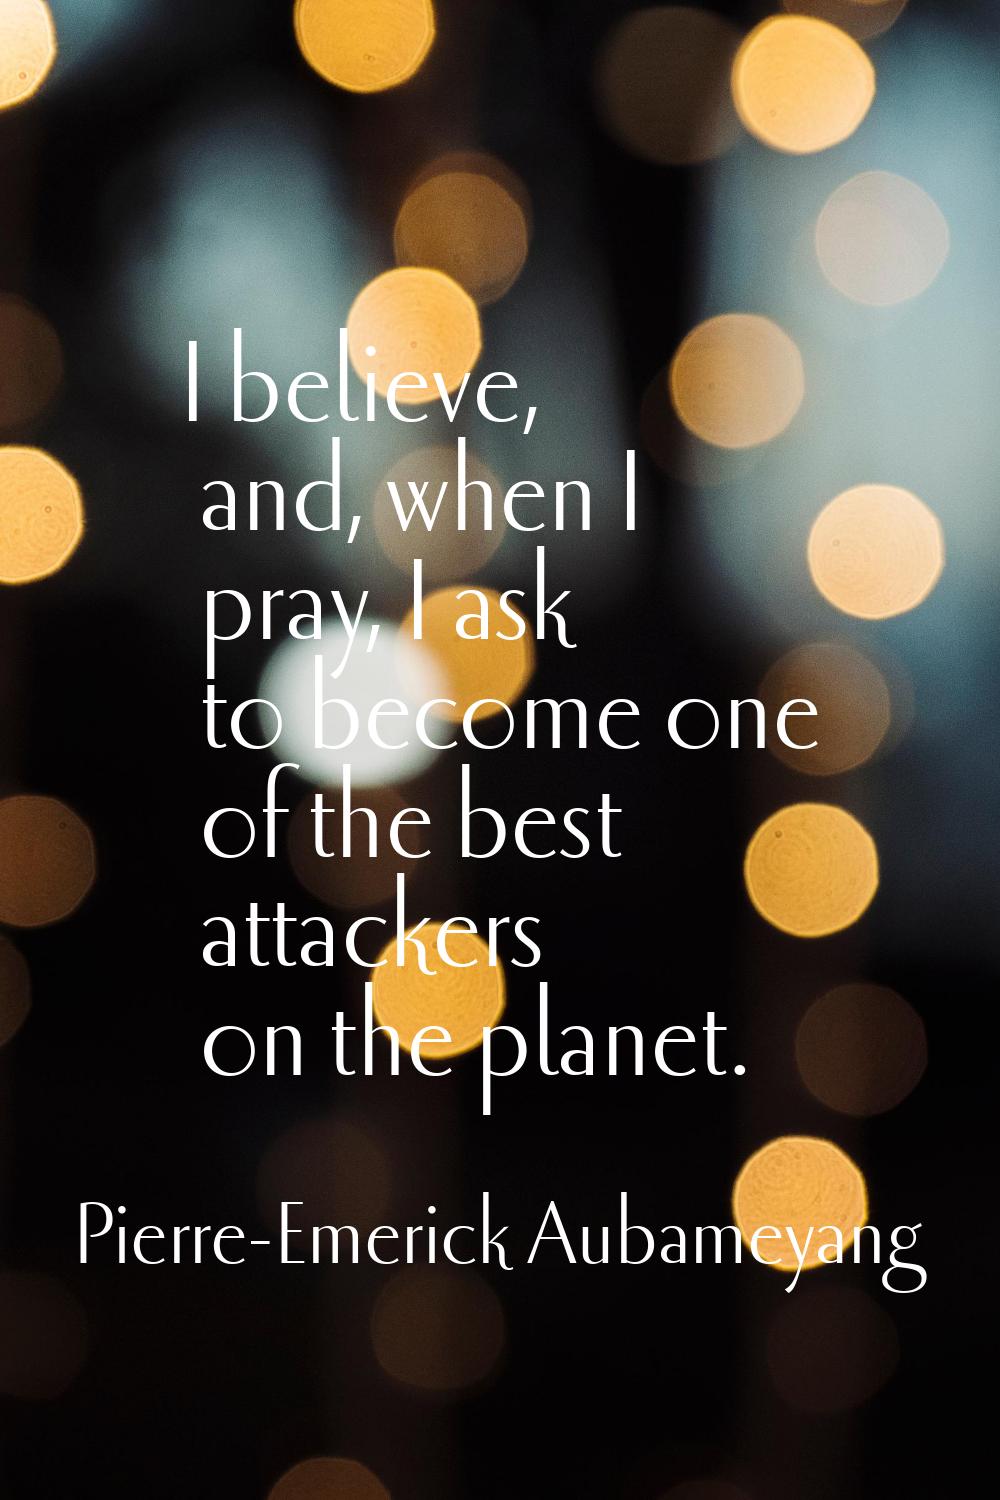 I believe, and, when I pray, I ask to become one of the best attackers on the planet.